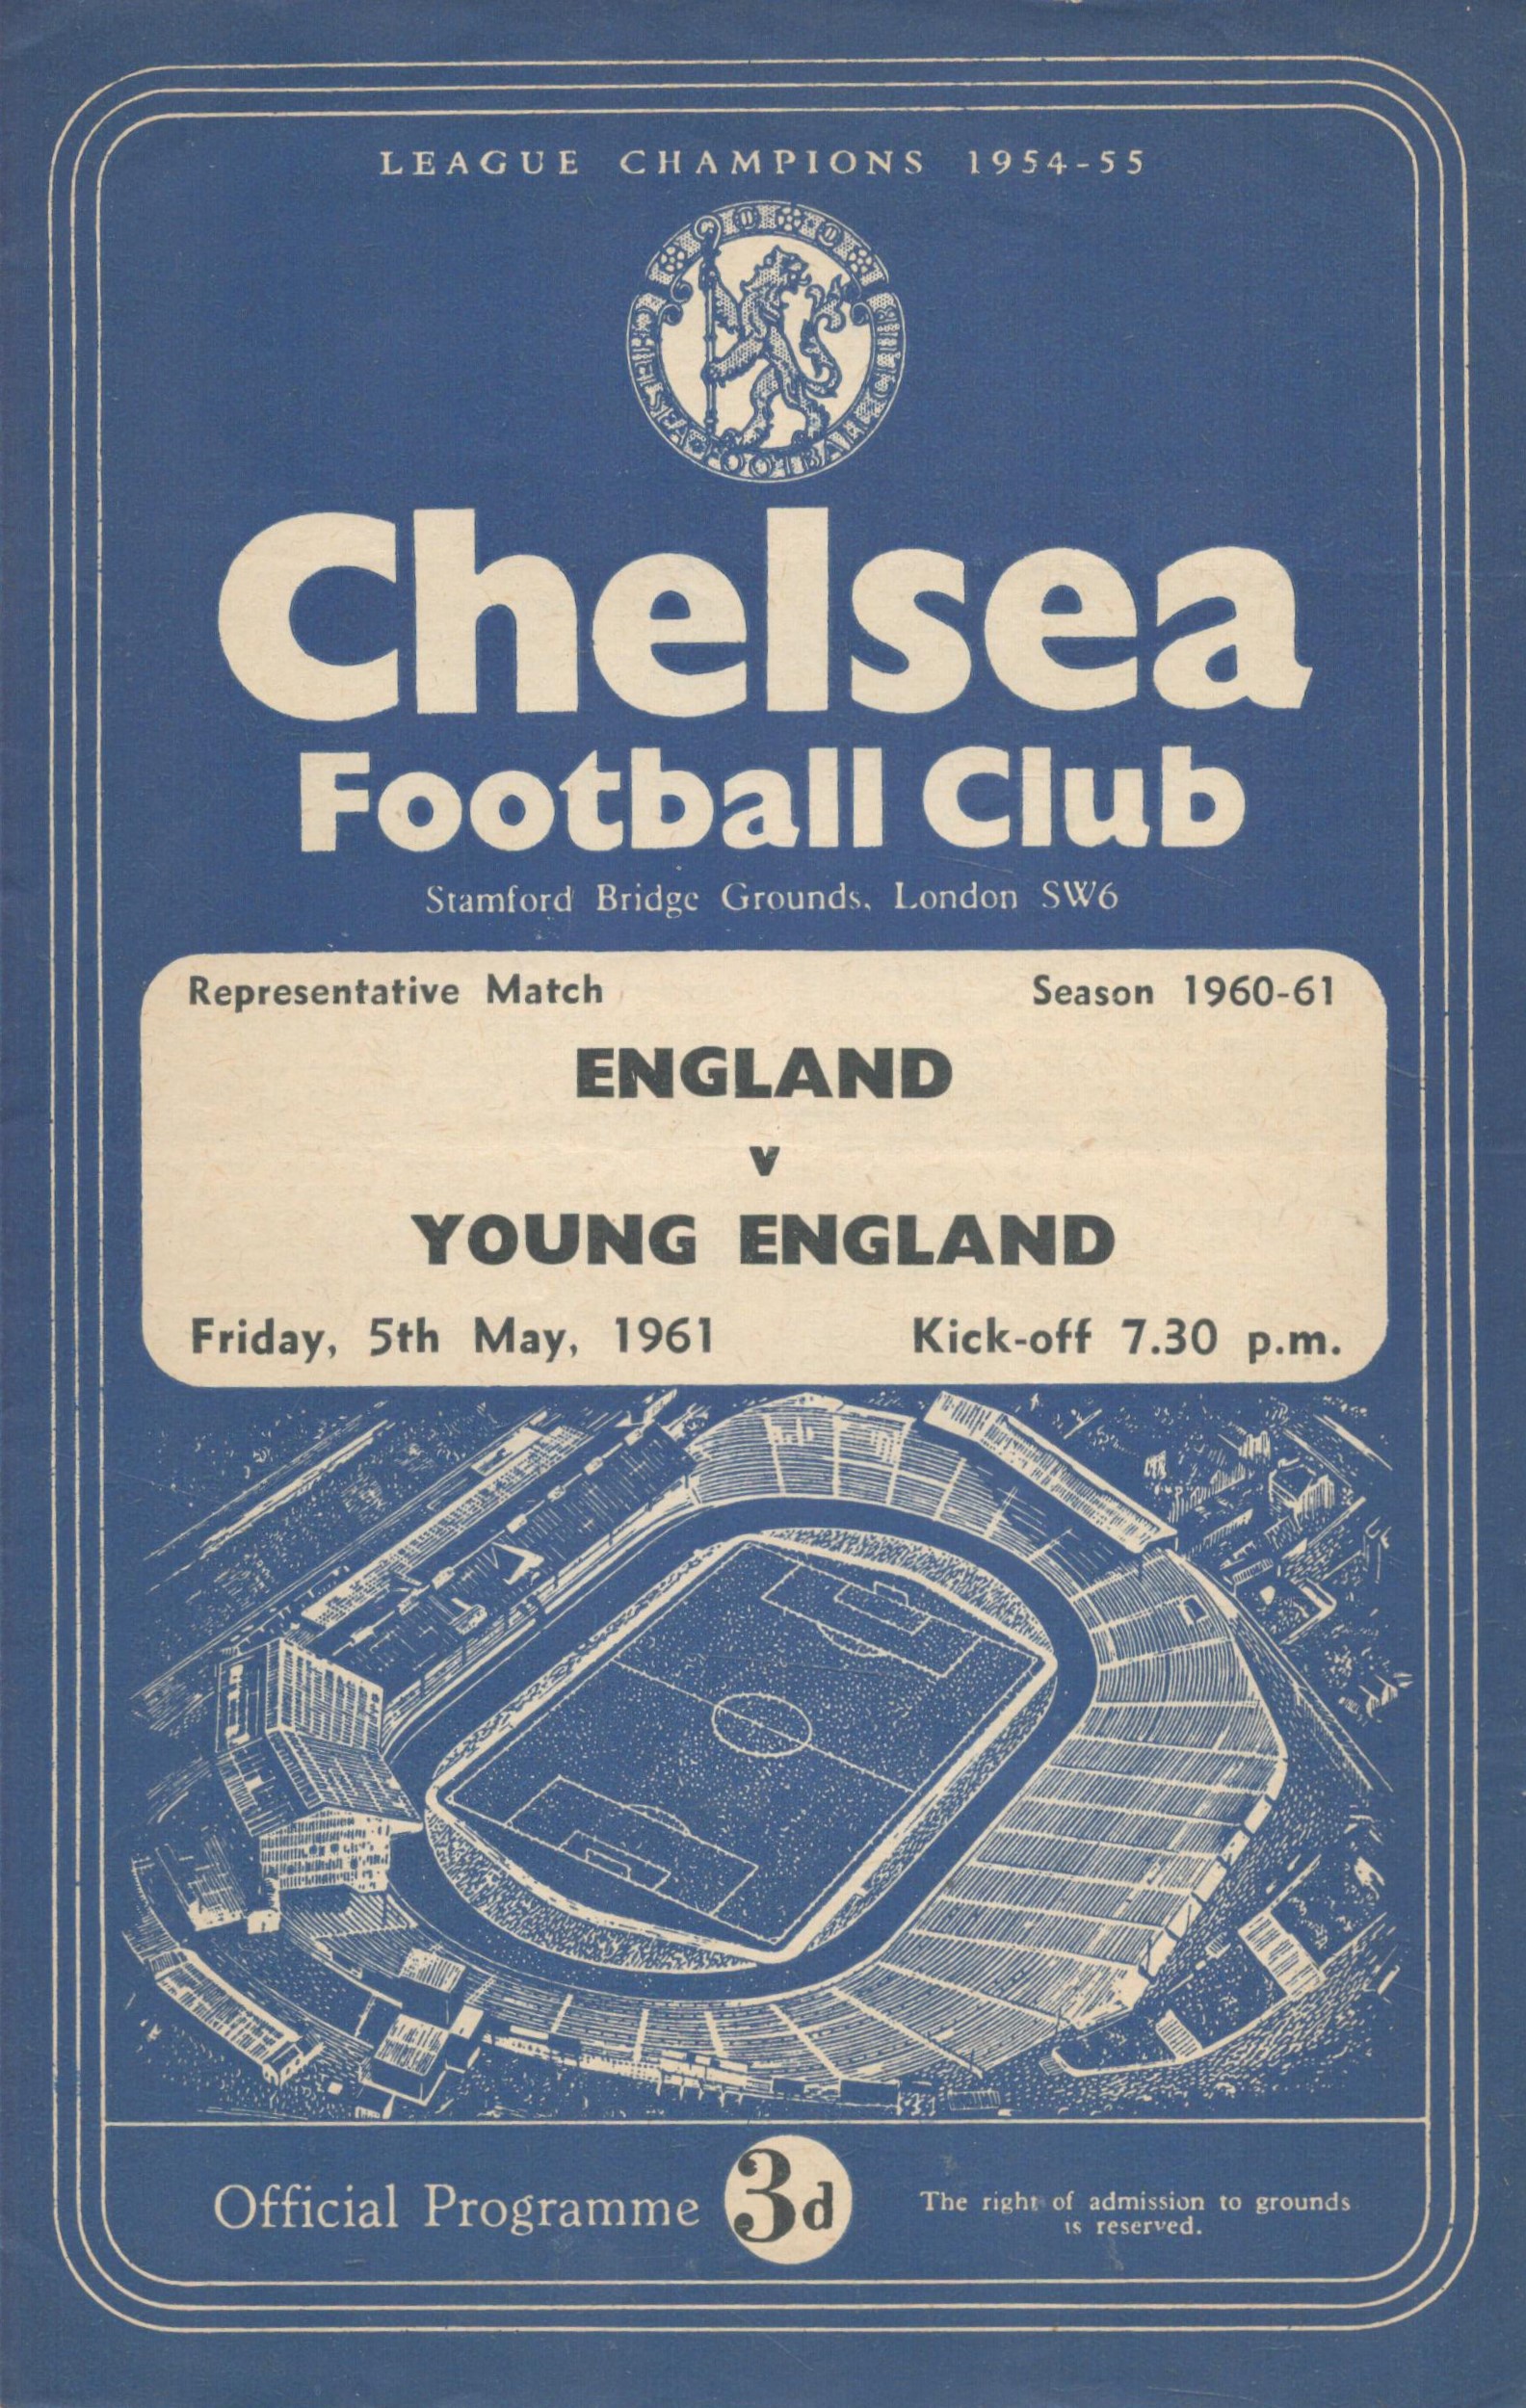 Vintage Matchday Programme For England Vs Young England 5/5/1961. Good condition. All autographs